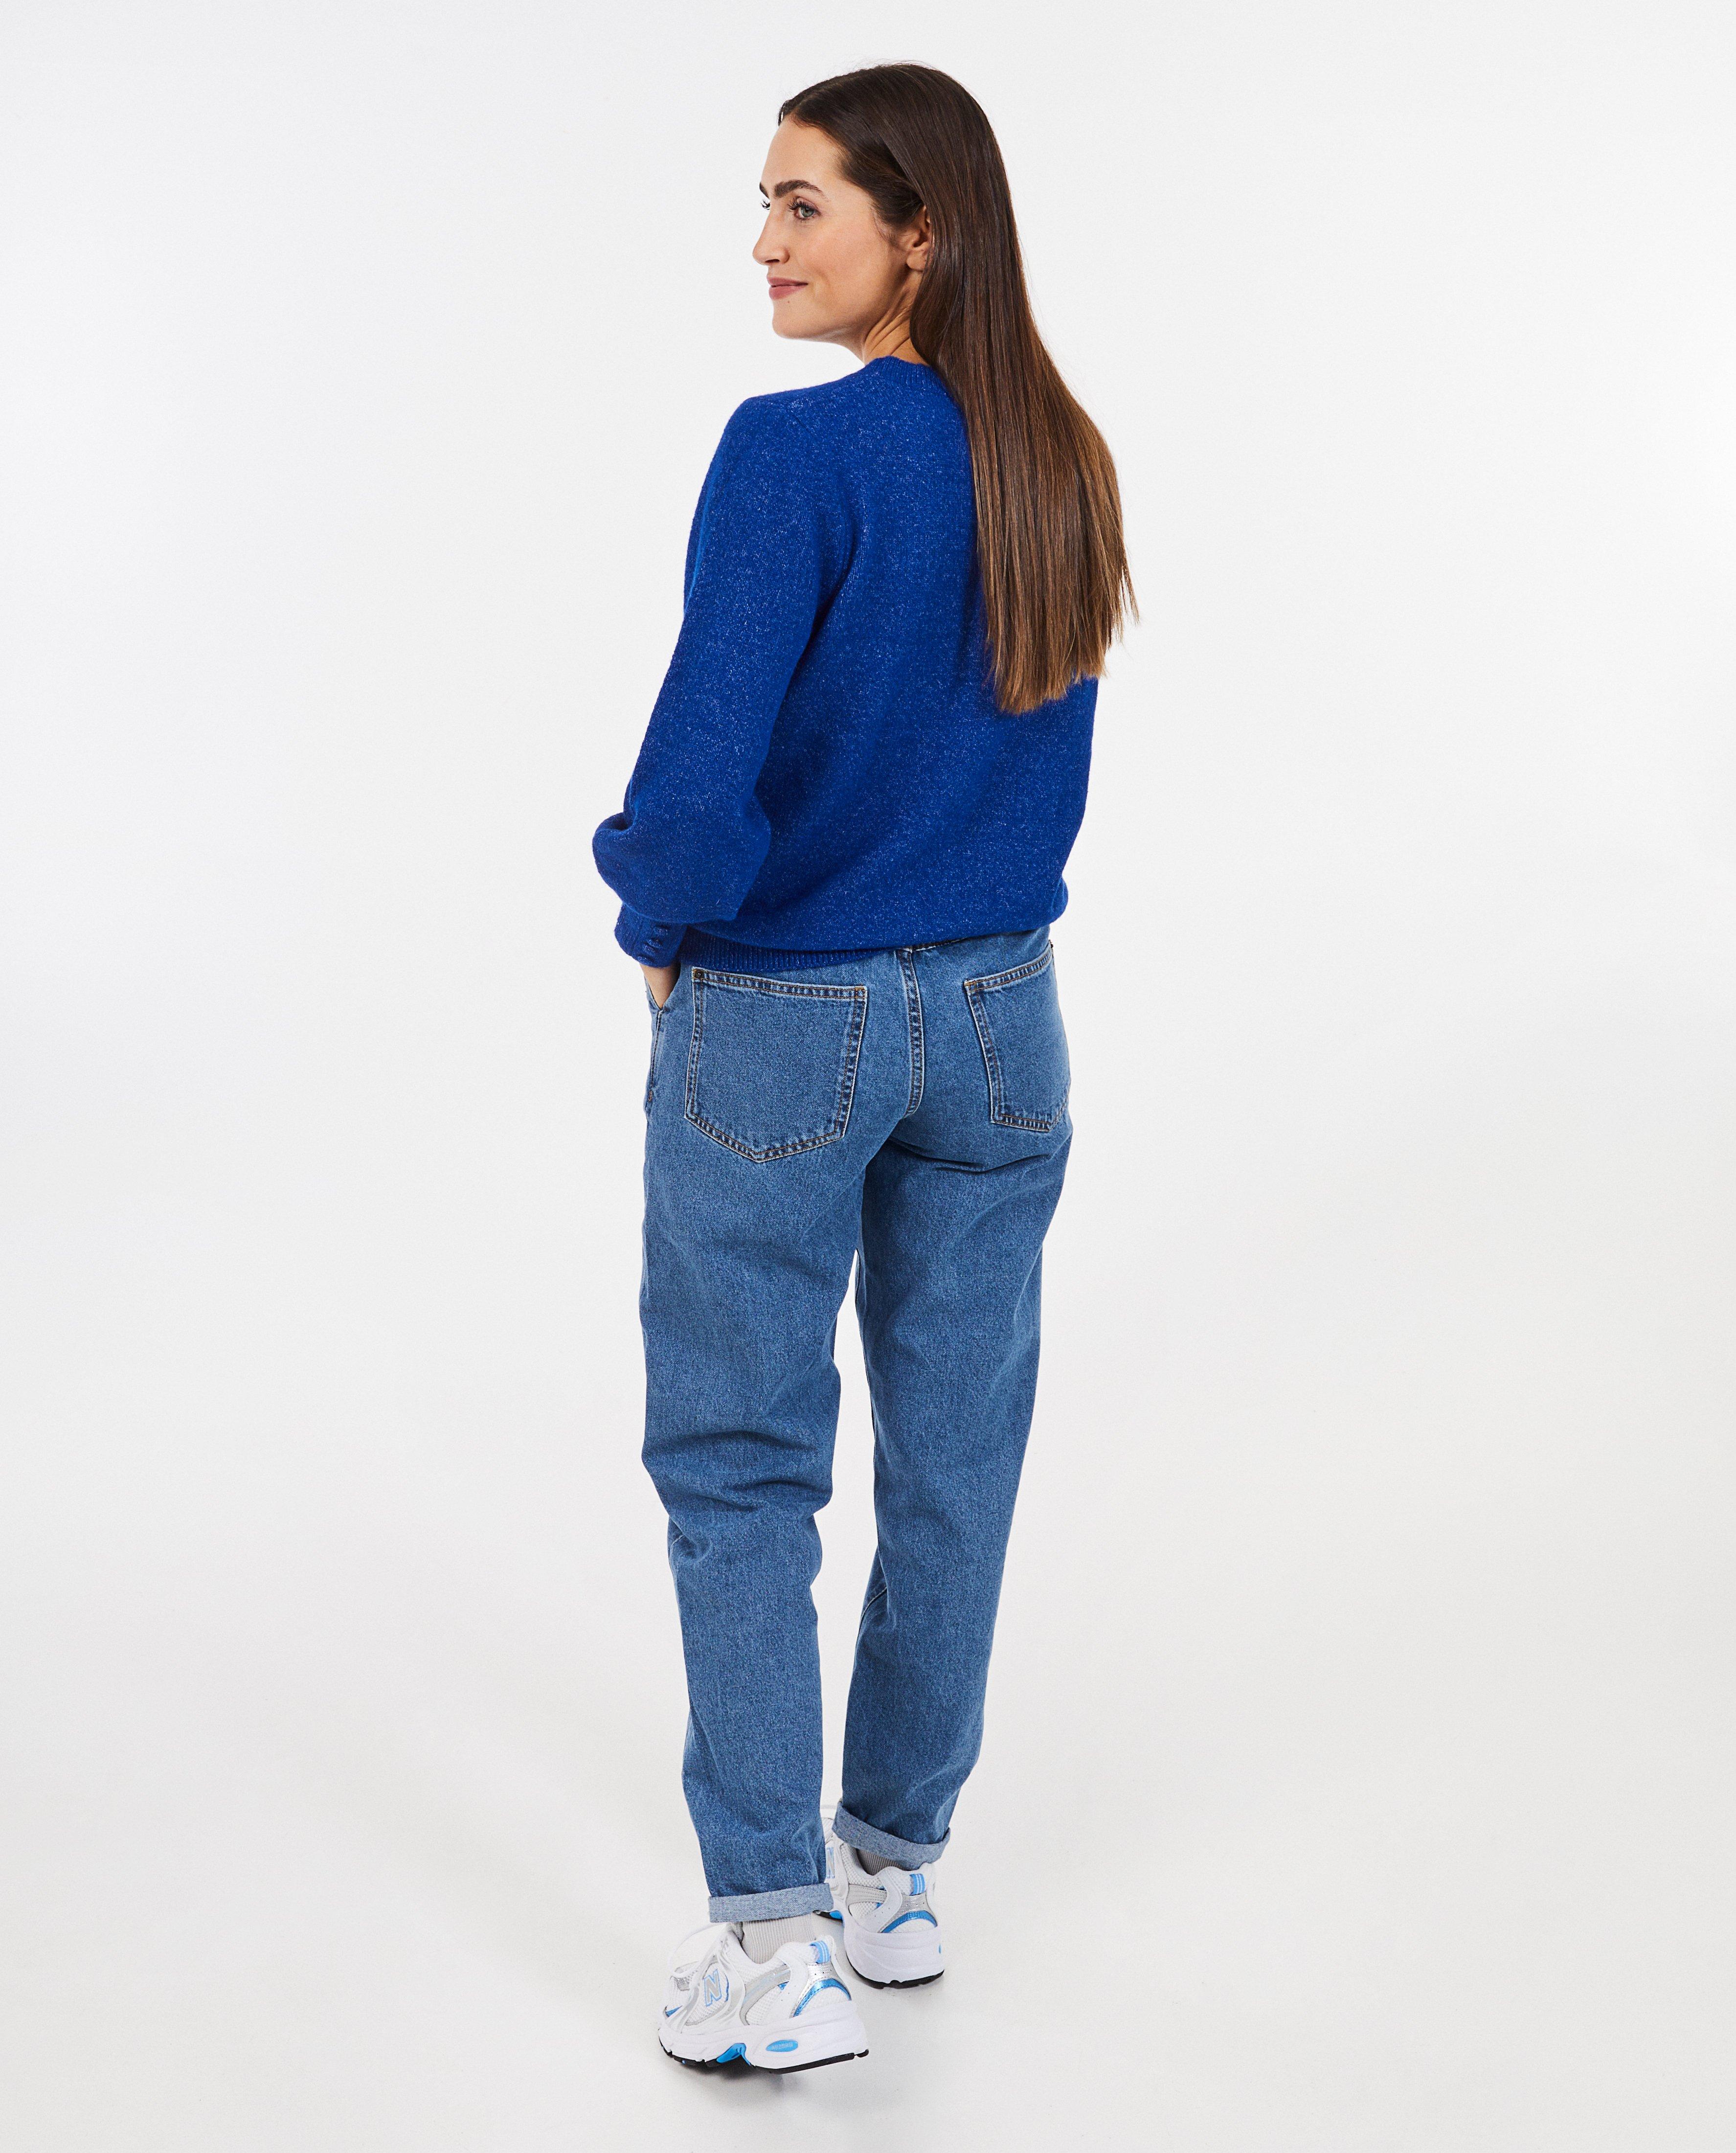 Jeans - Blauwe jeans, slouchy fit